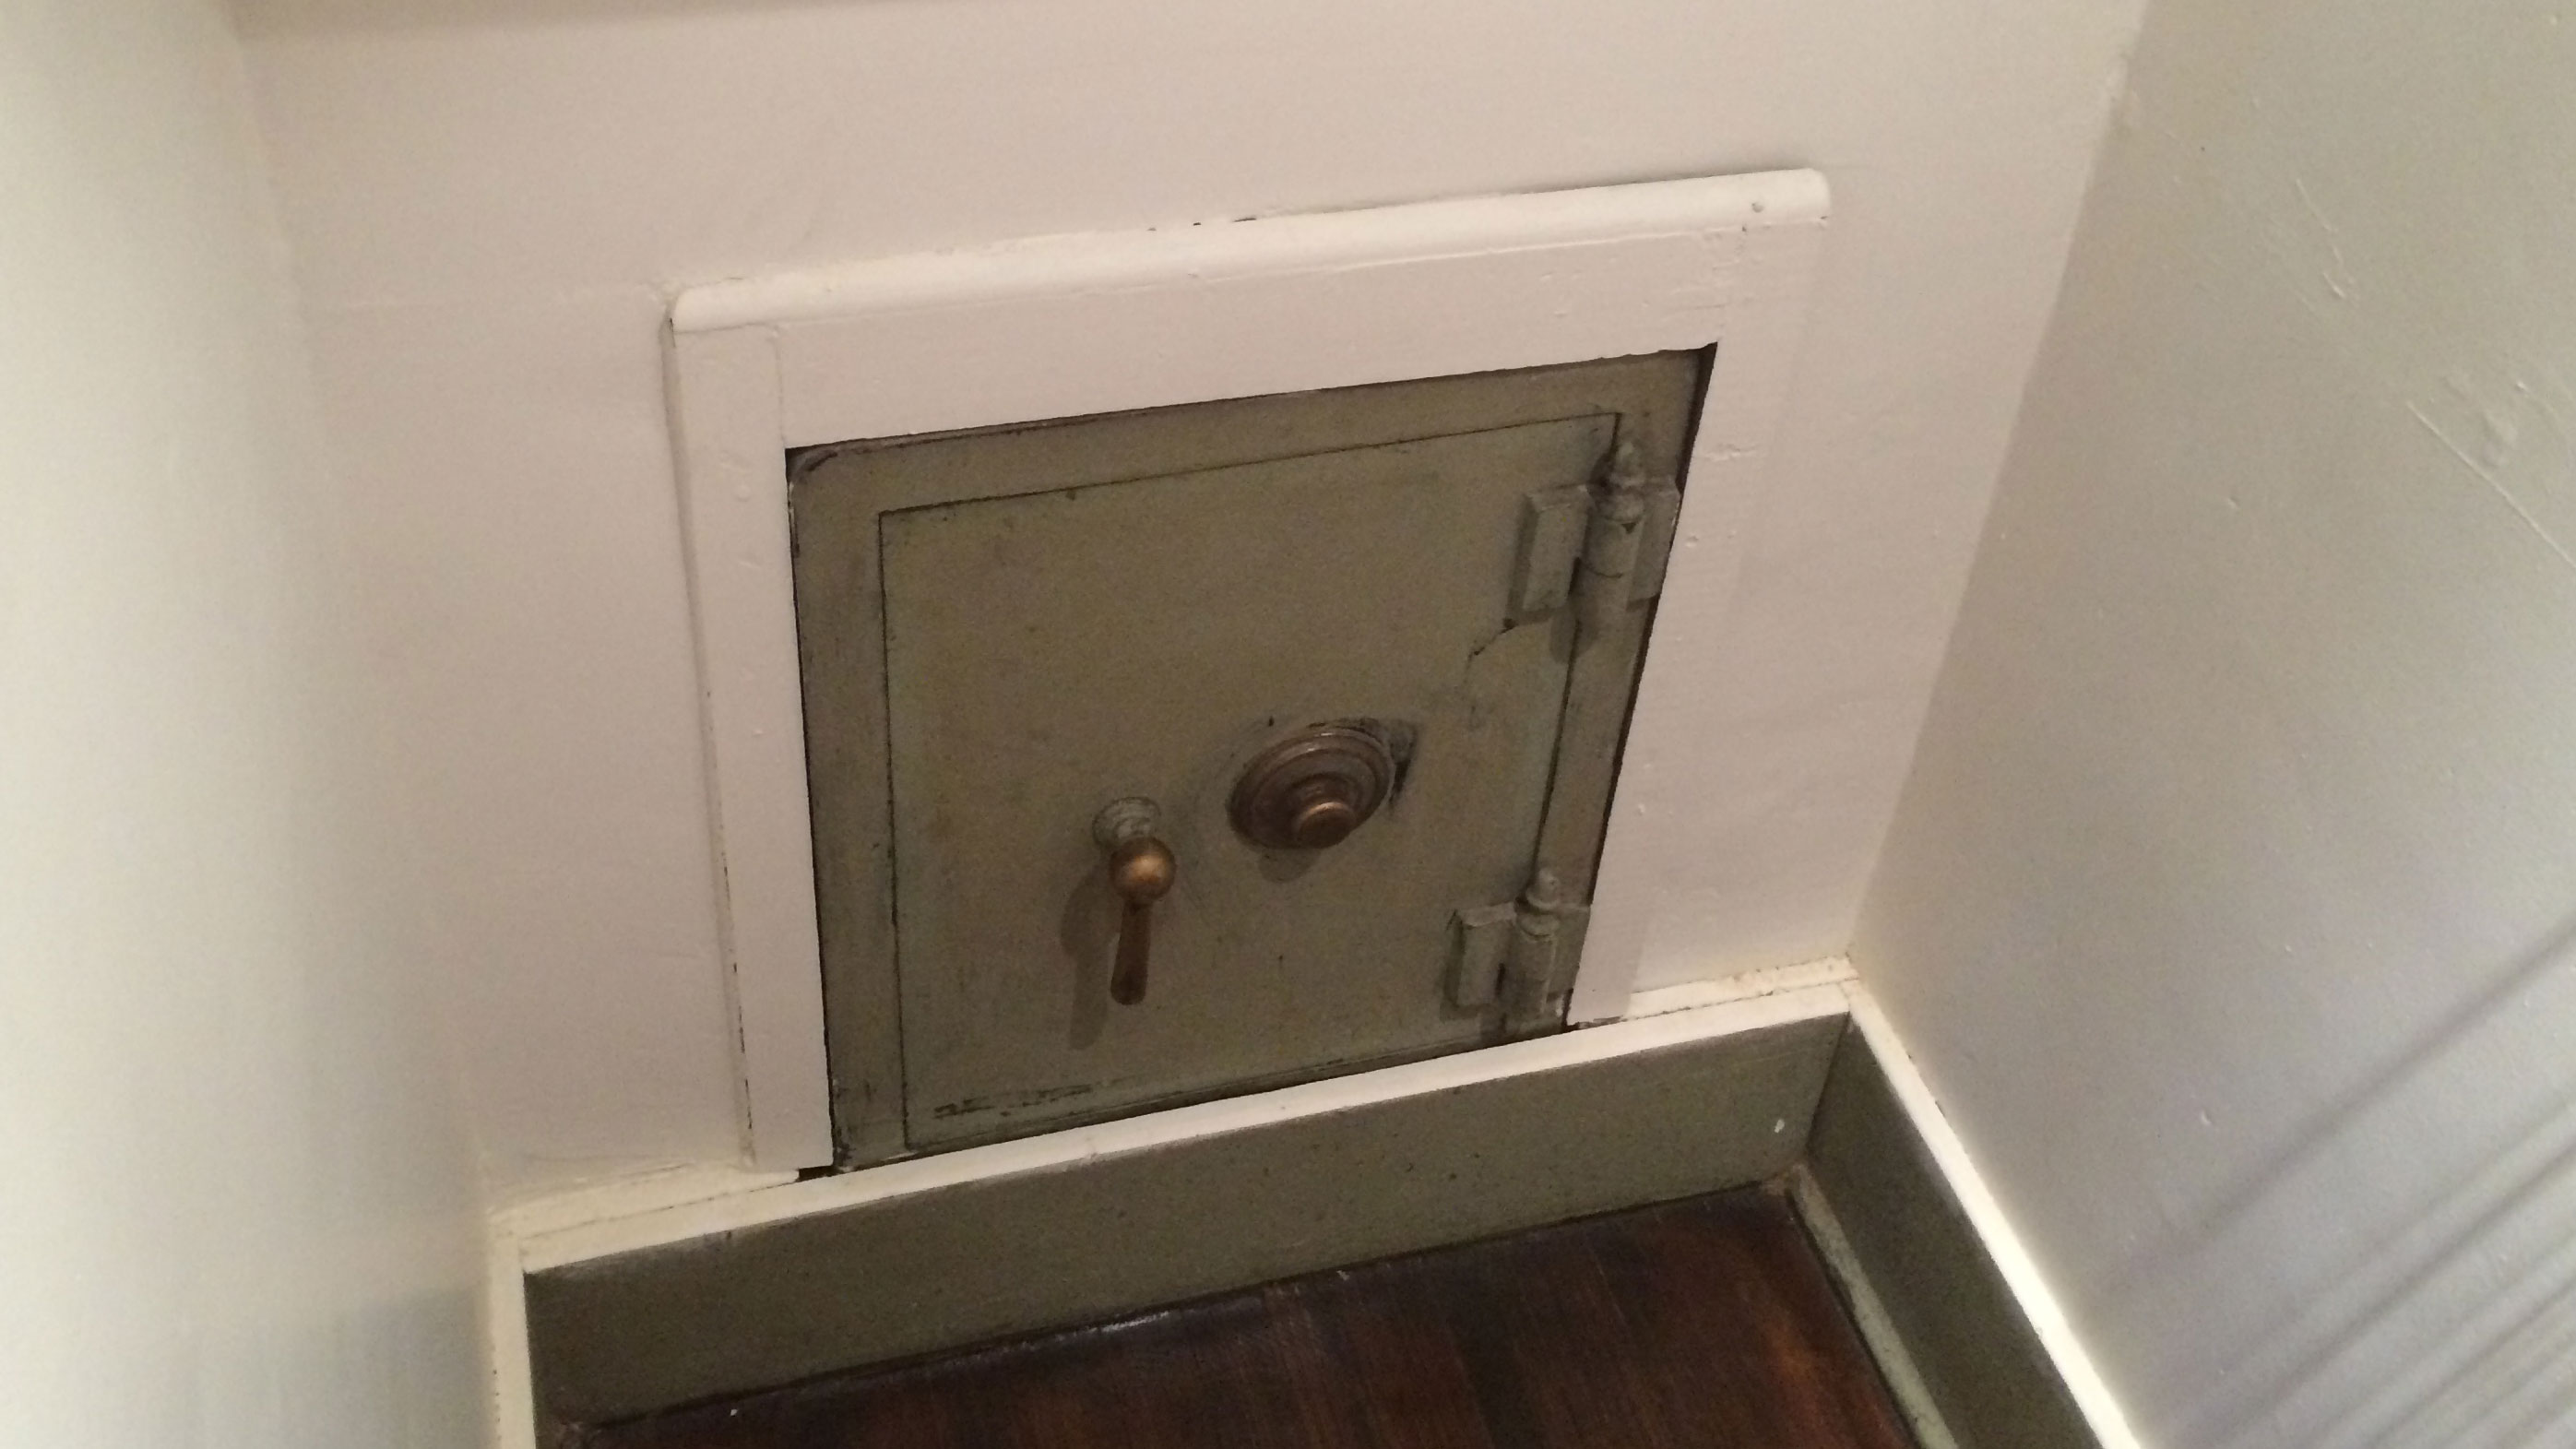 i found a locked safe hidden at the back of a closet in my new house